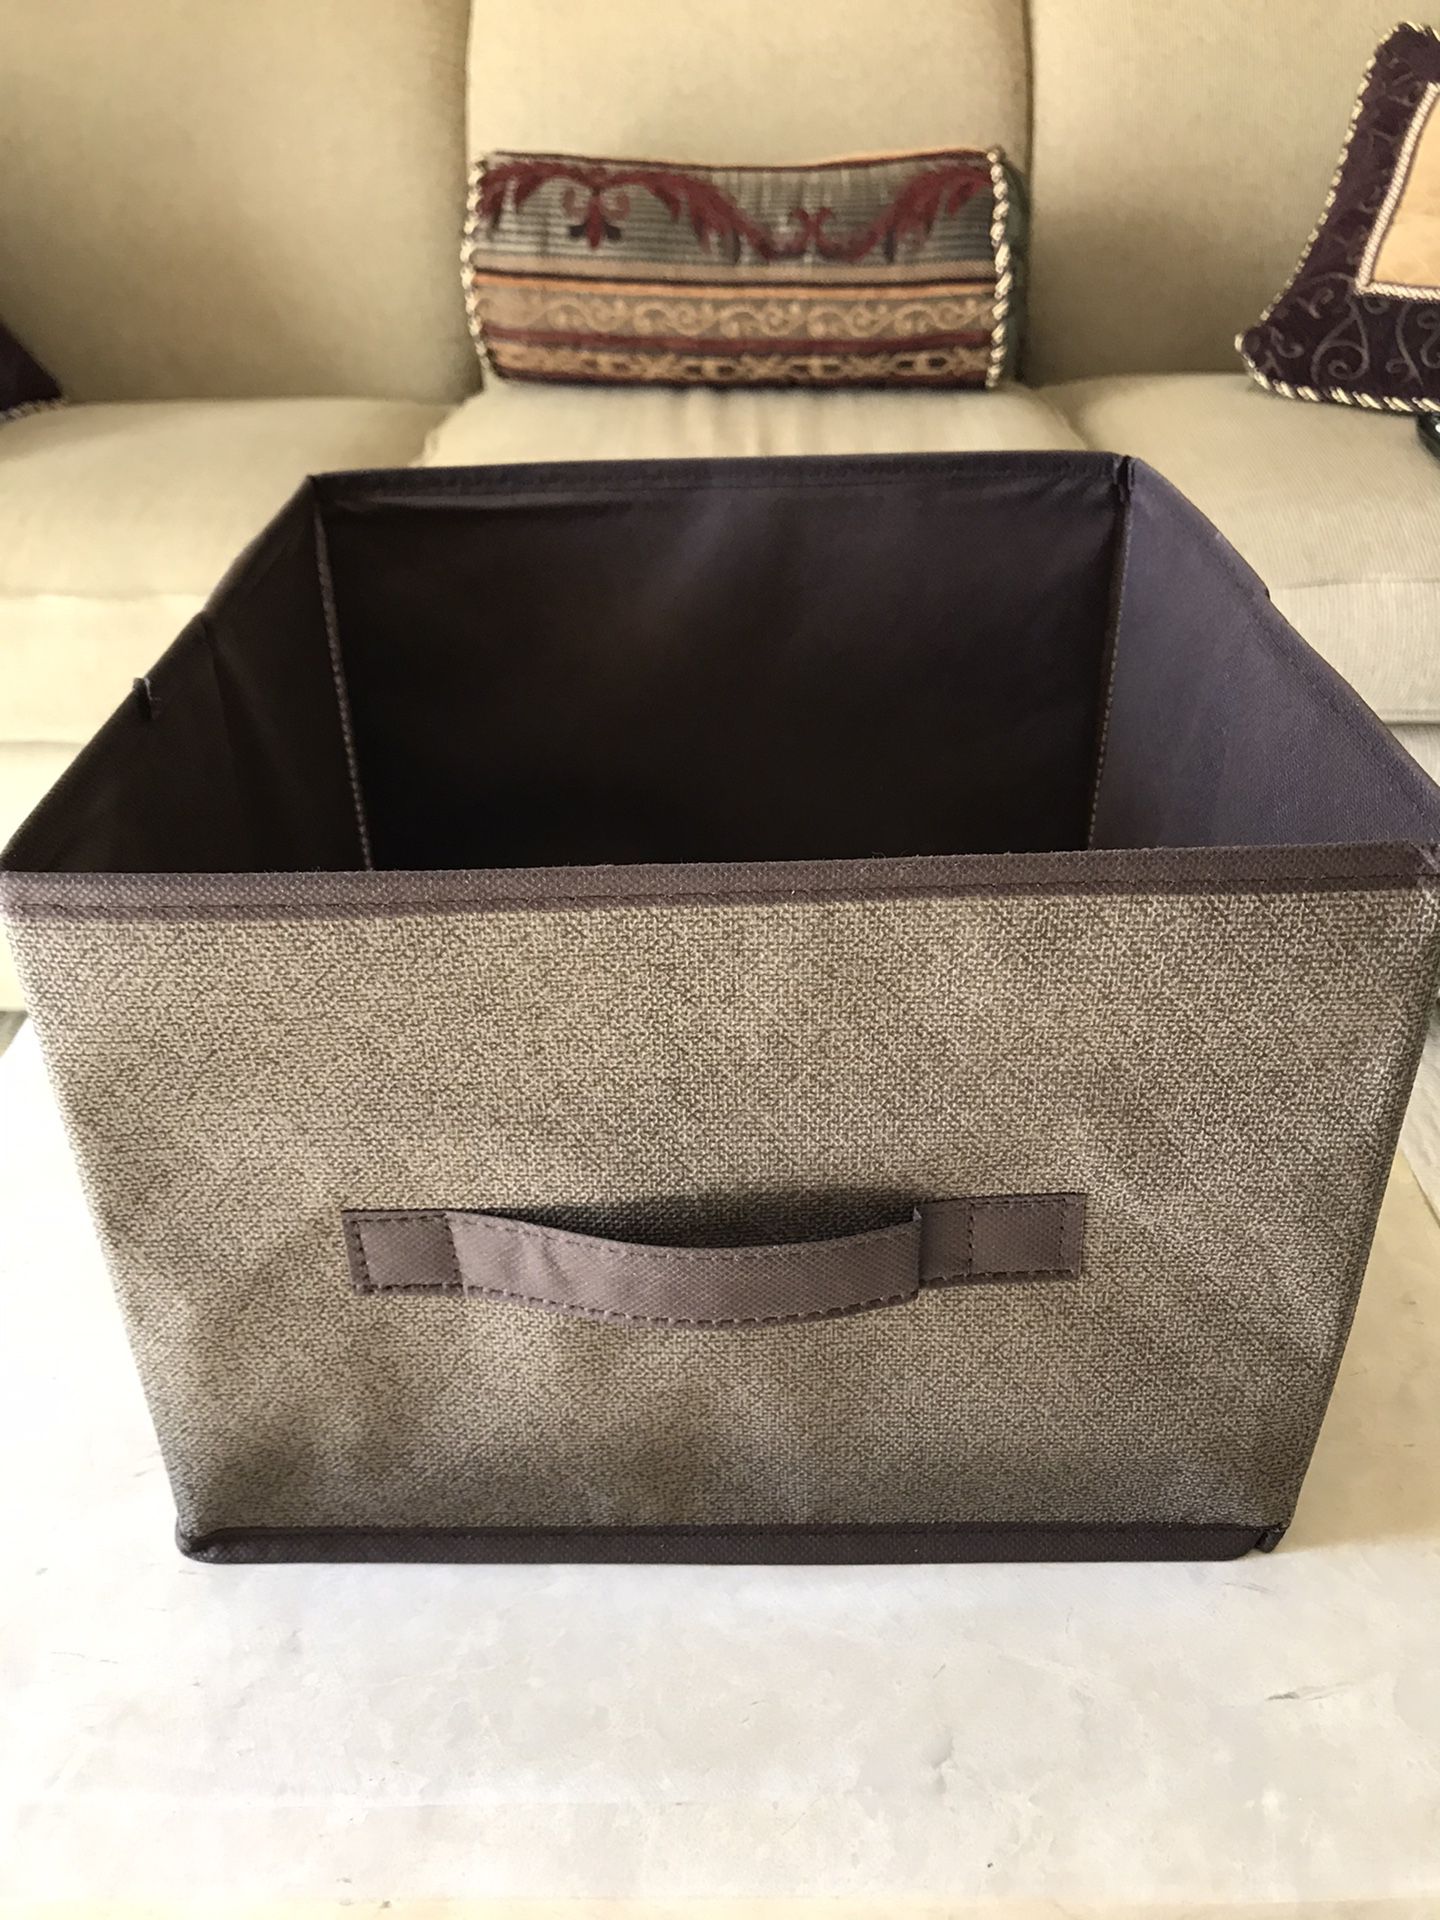 Modern Storage Container ~ 11in x 11in x 8in Neutral Earthy Tone. Fits anywhere.